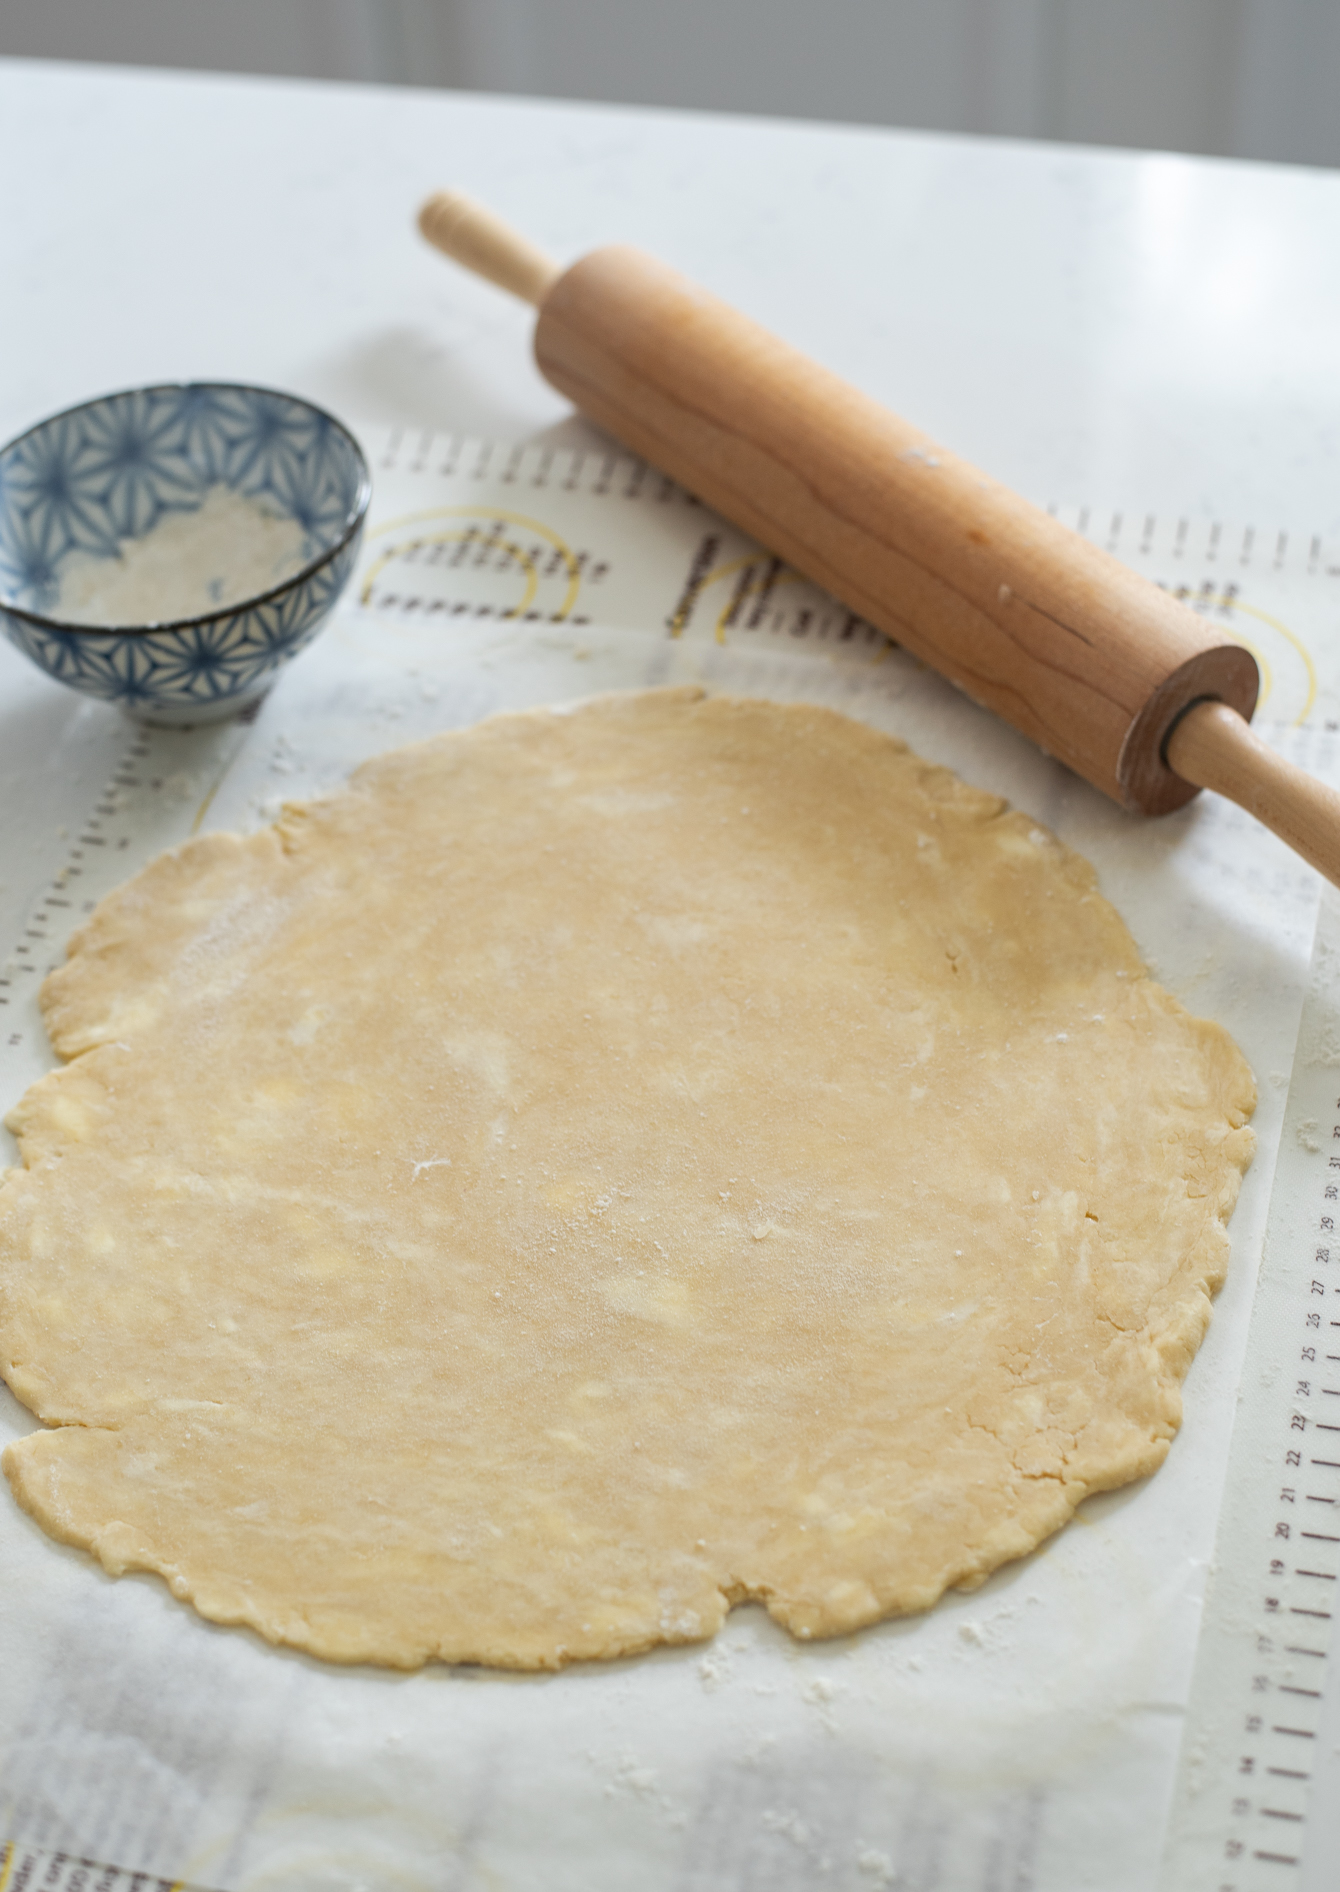 Pie crust is rolled out with a rolling pin on the silicon baking mat